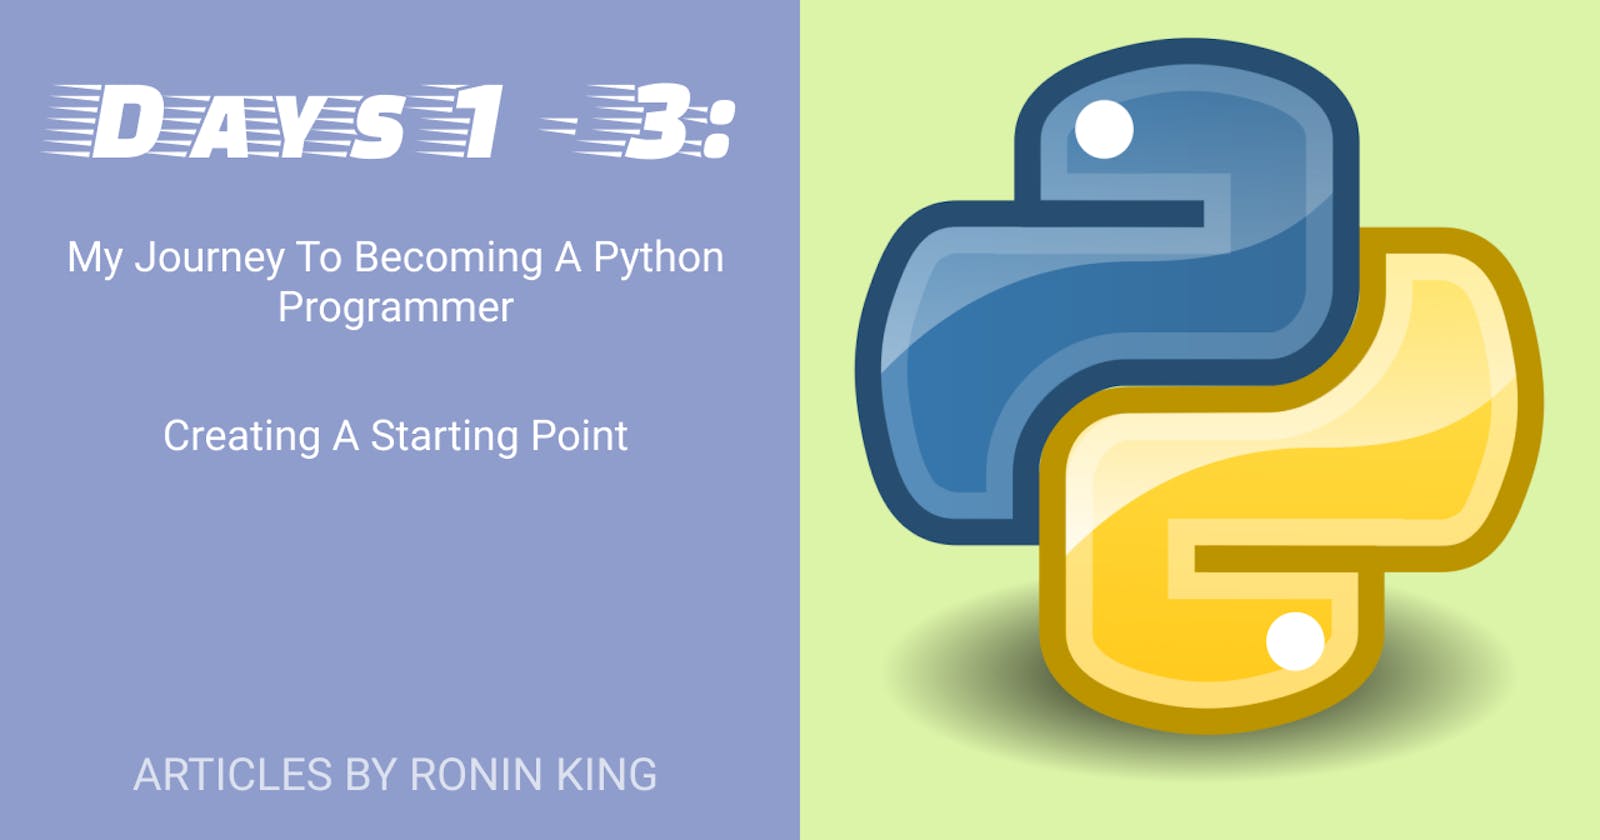 Day 1 - 3: My Journey To Becoming A Python Programmer